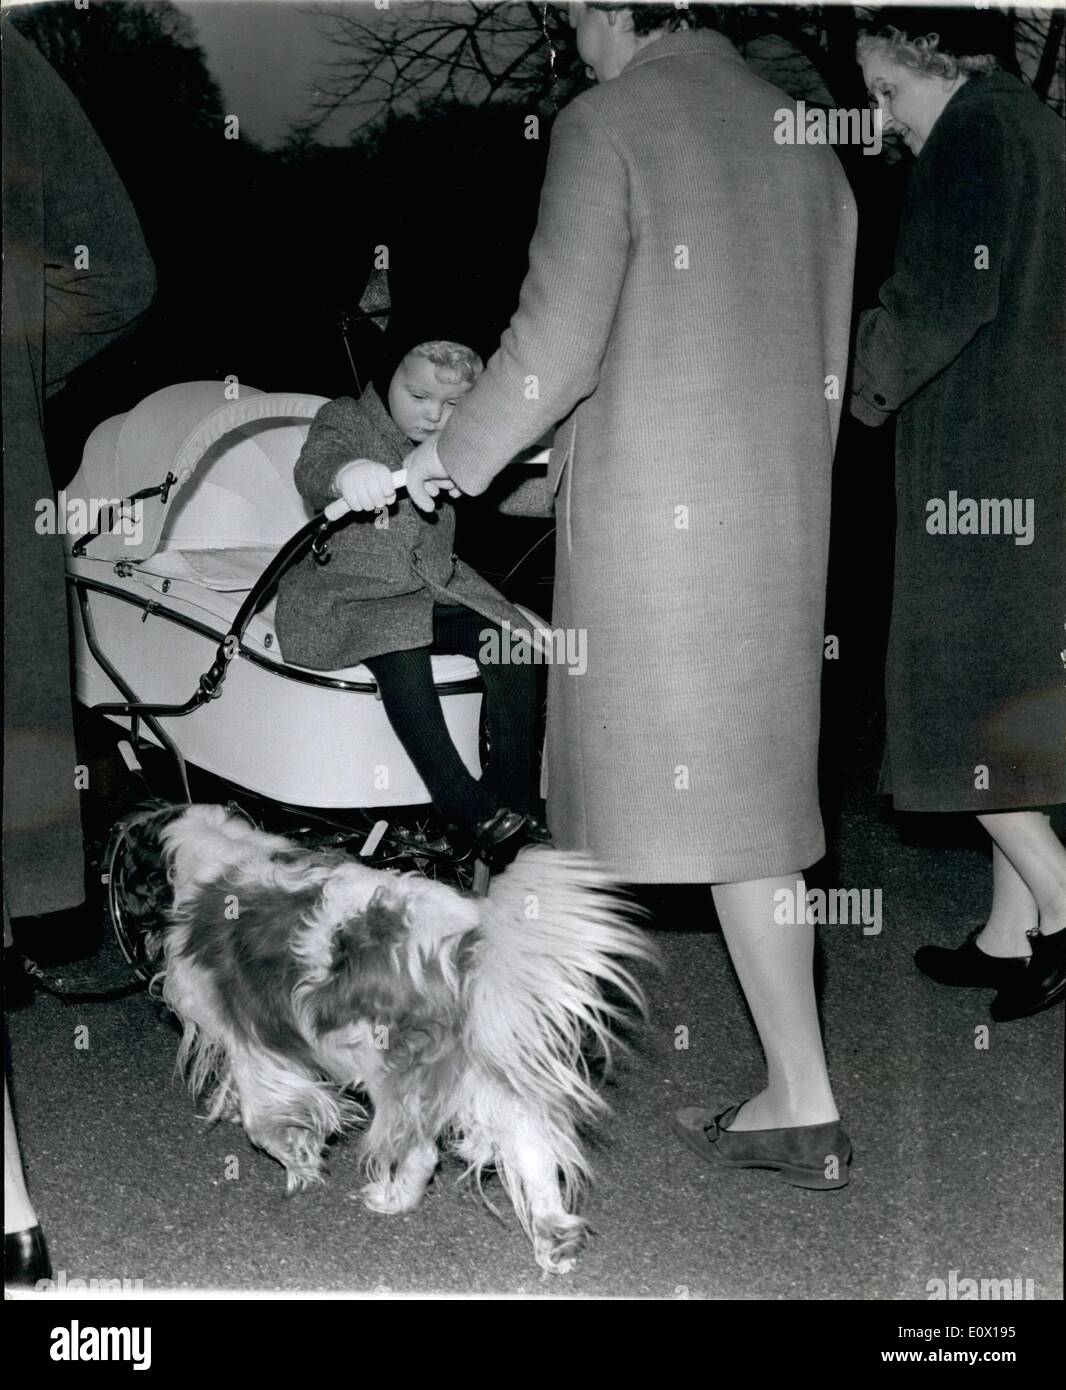 Dec. 12, 1964 - A Park outing for the young Earl of ST.Andrews.: George Philips Nicholas. the Earl of ST. Andrews, 2-year Ã¢â‚¬â€œold son of the Duke and Duchess of Kent, was to be seen out walking in Kensington Gardens. Photo Shows a little Leg-weary after his walk the young Earl hitohes a ride on his sister's (Helen Marina Lucy Windsor) pram. Stock Photo